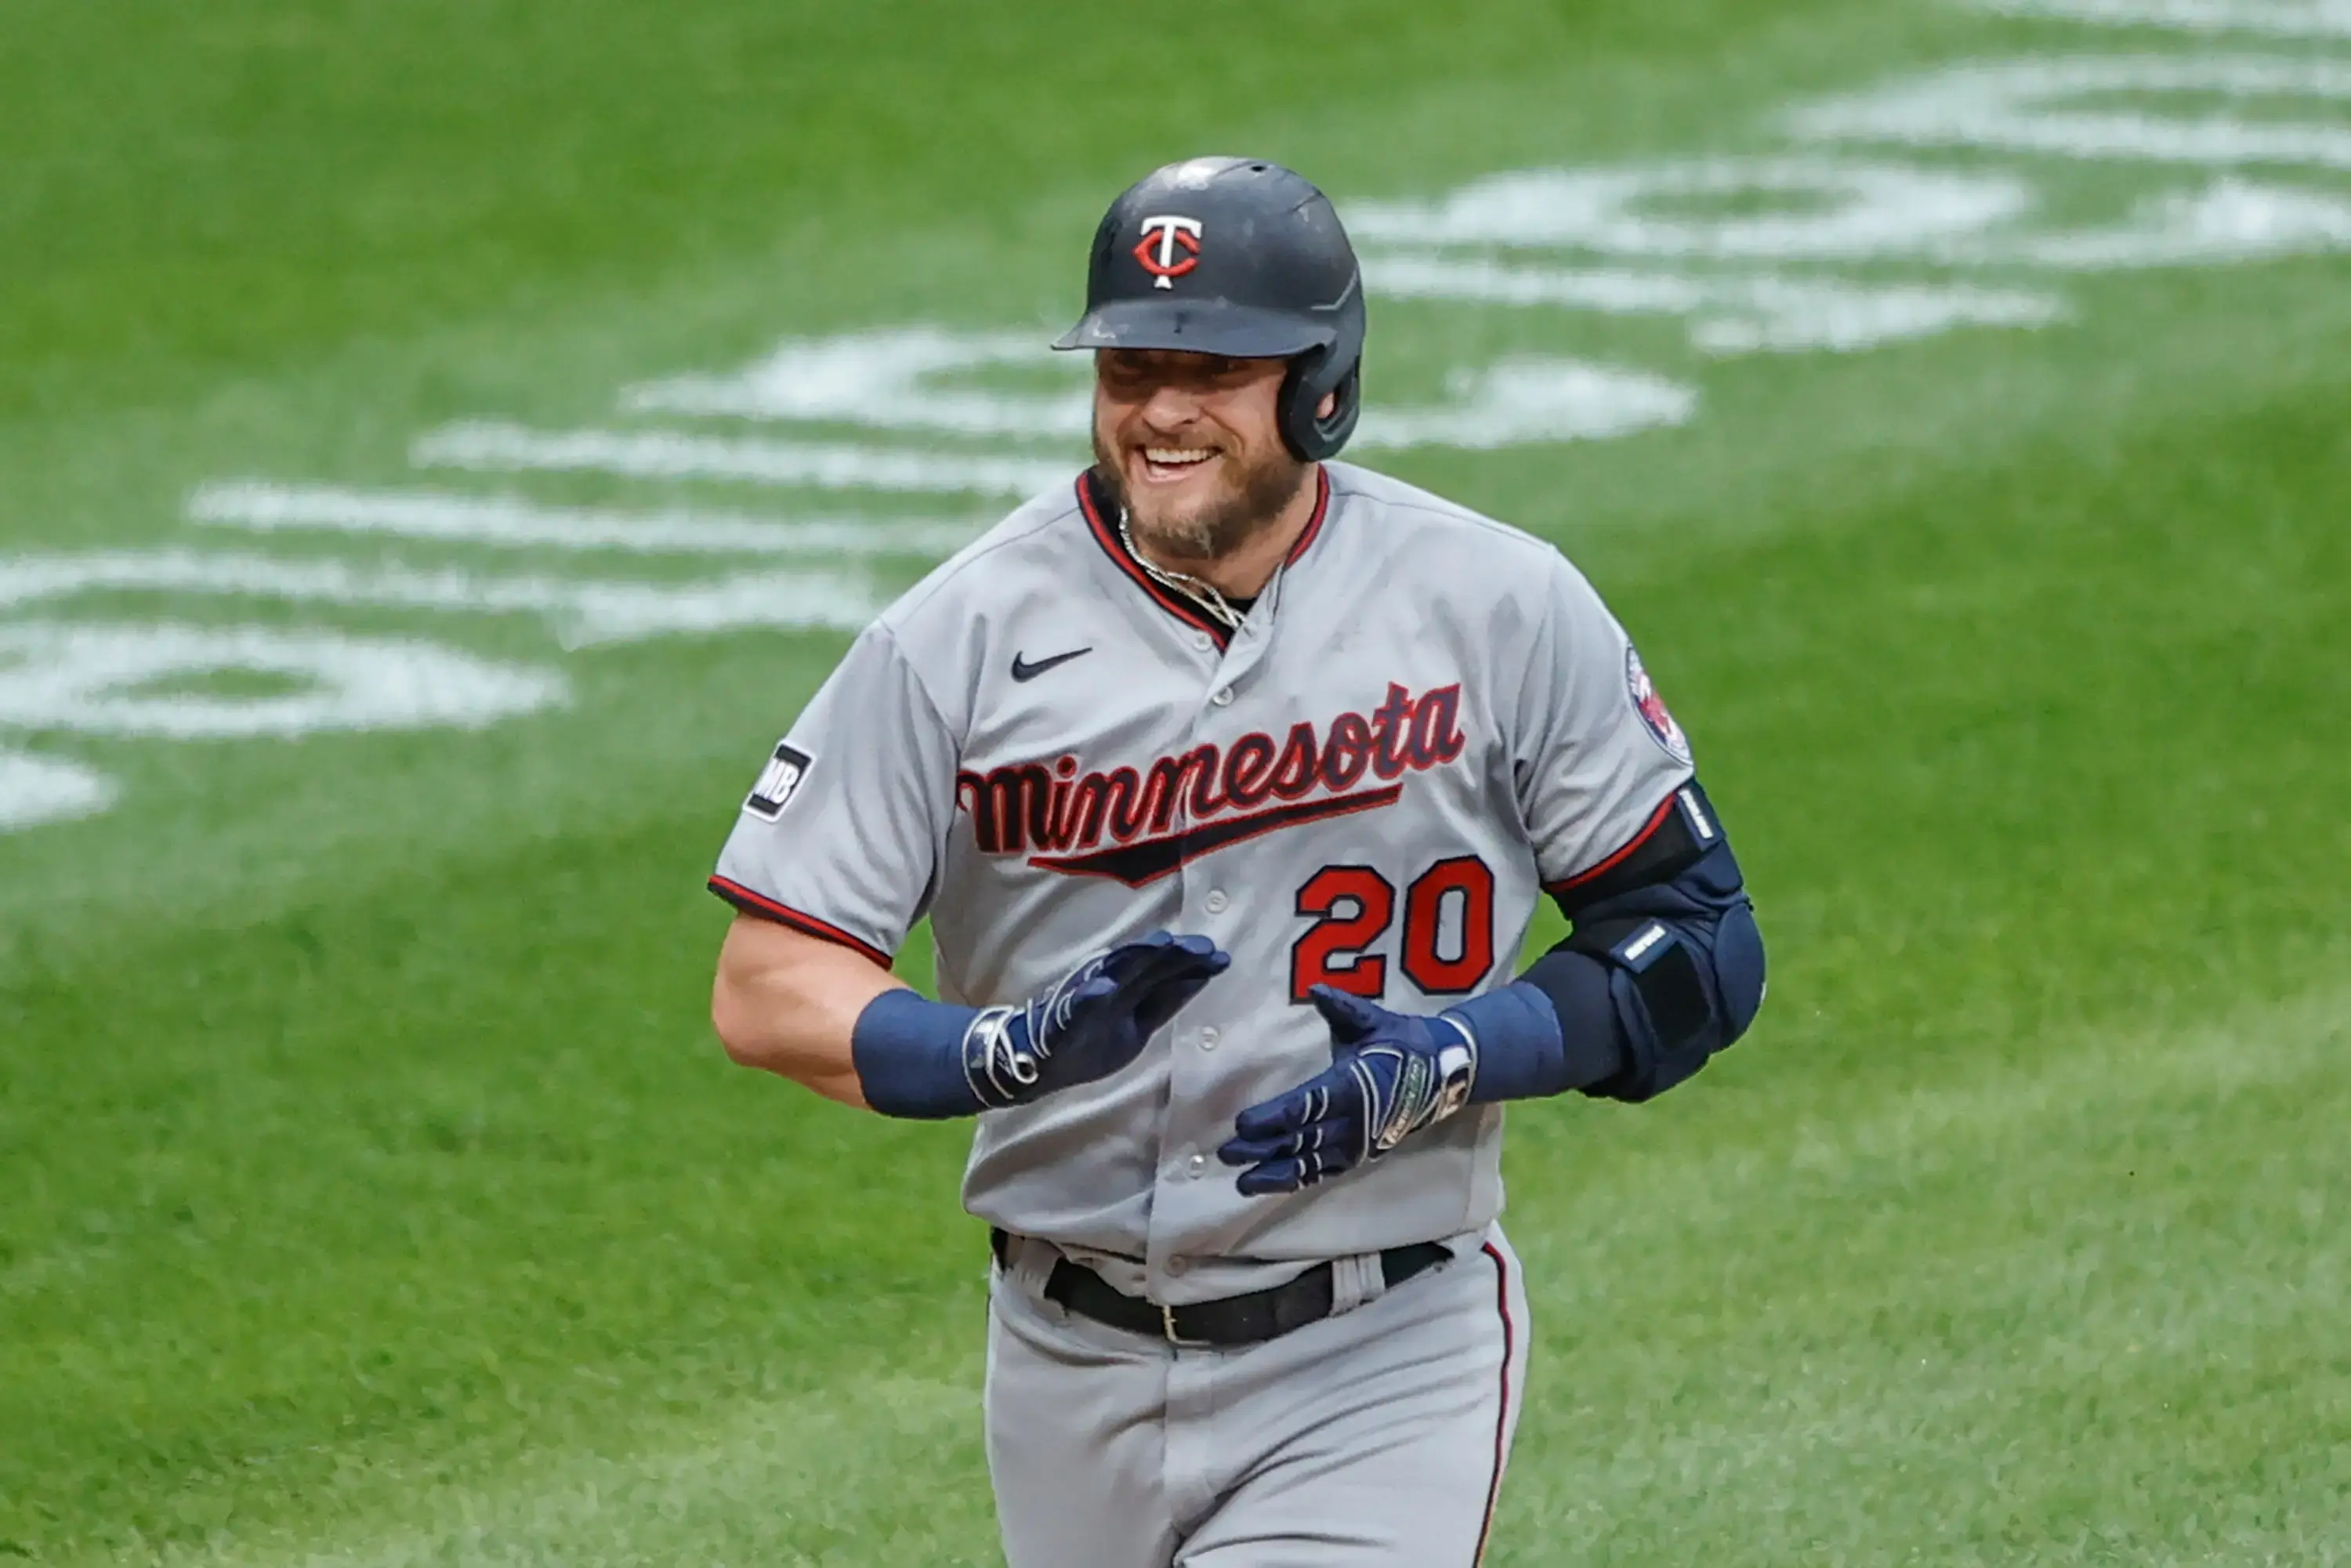 Jun 29, 2021; Chicago, Illinois, USA; Minnesota Twins third baseman Josh Donaldson (20) smiles as he rounds the bases after hitting a two run home run against the Chicago White Sox during the first inning at Guaranteed Rate Field. / Kamil Krzaczynski-USA TODAY Sports